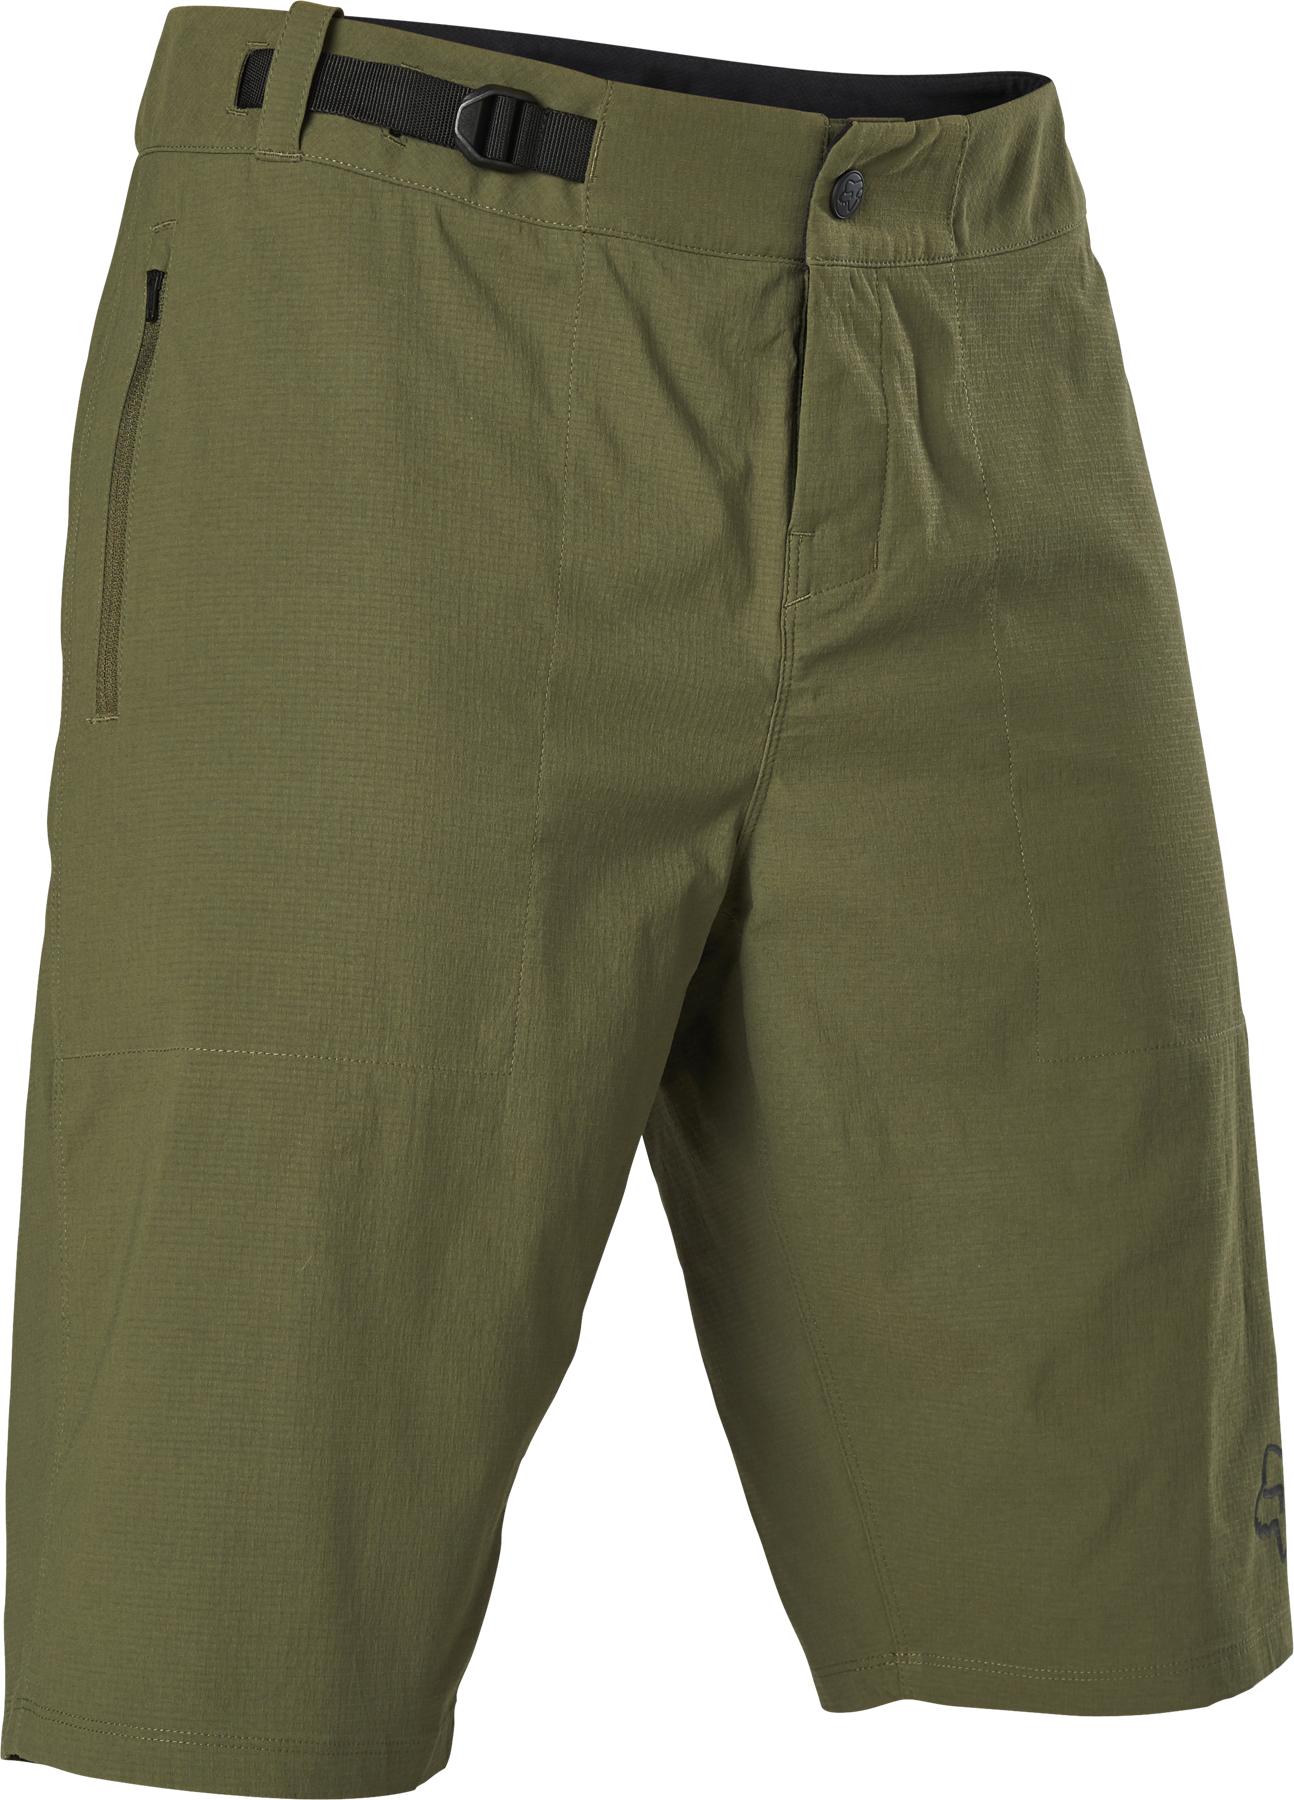 Fox Racing Ranger Shorts (with Liner) - Olive Green